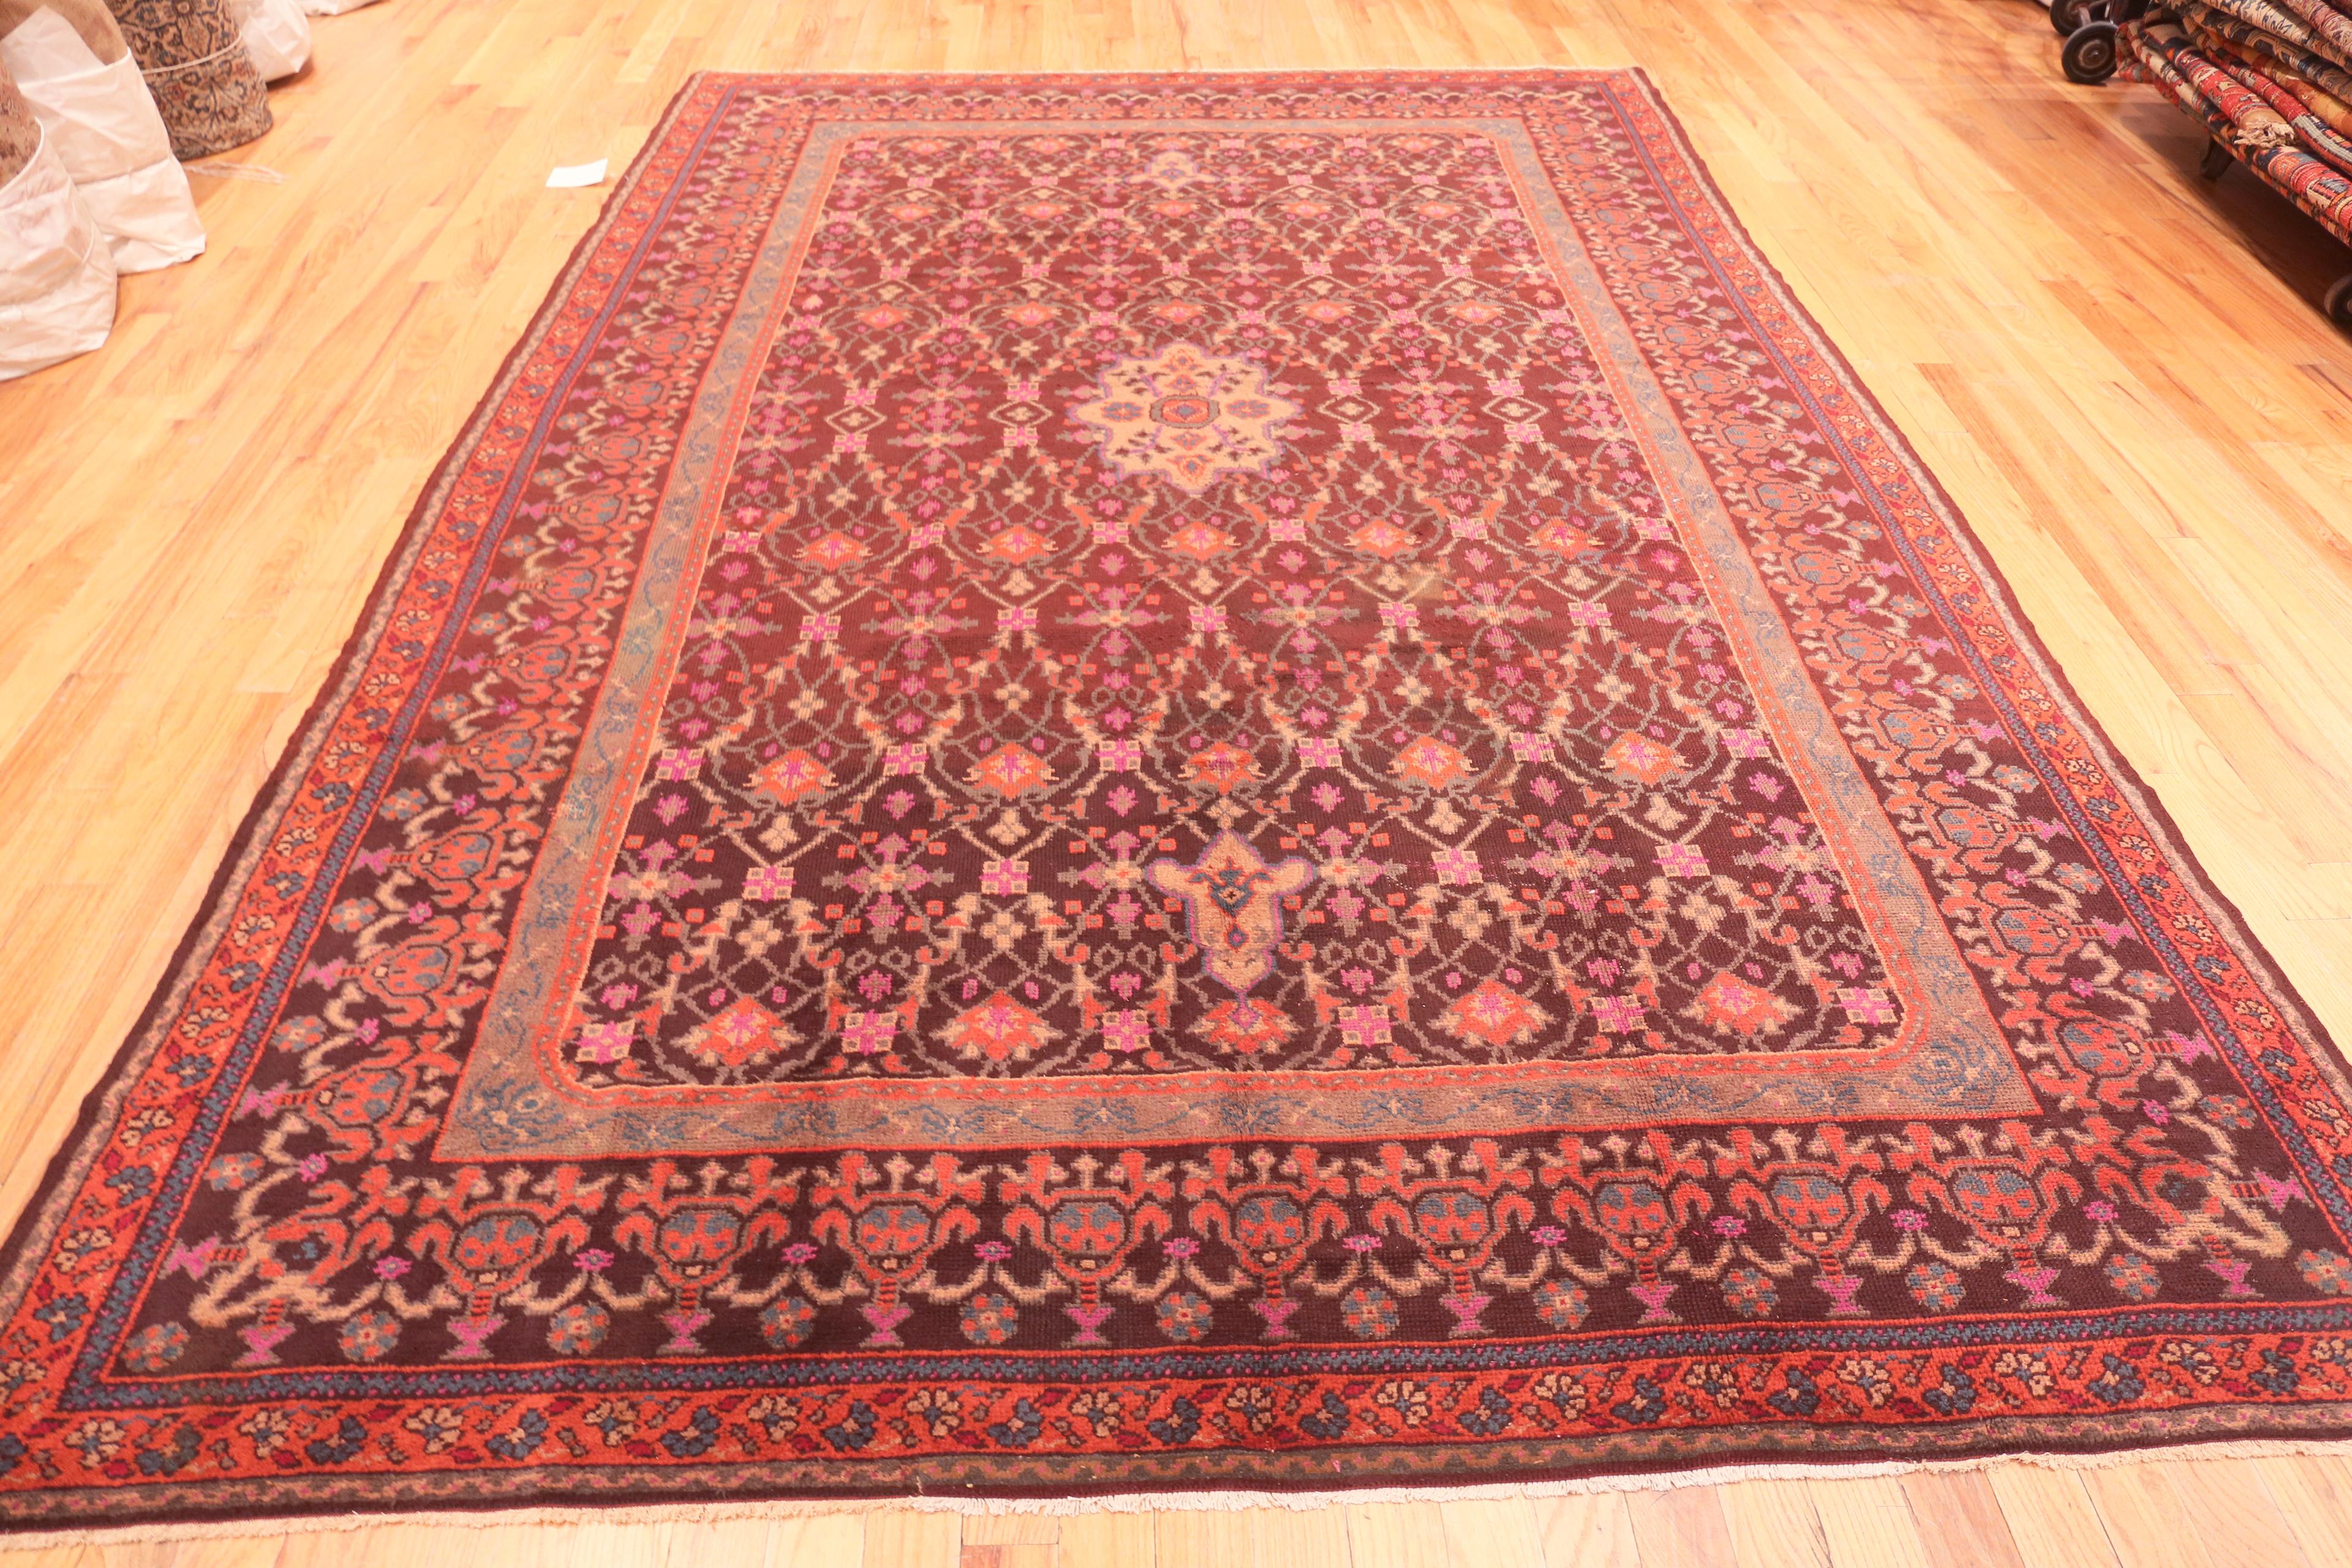 8 by 11 rug size